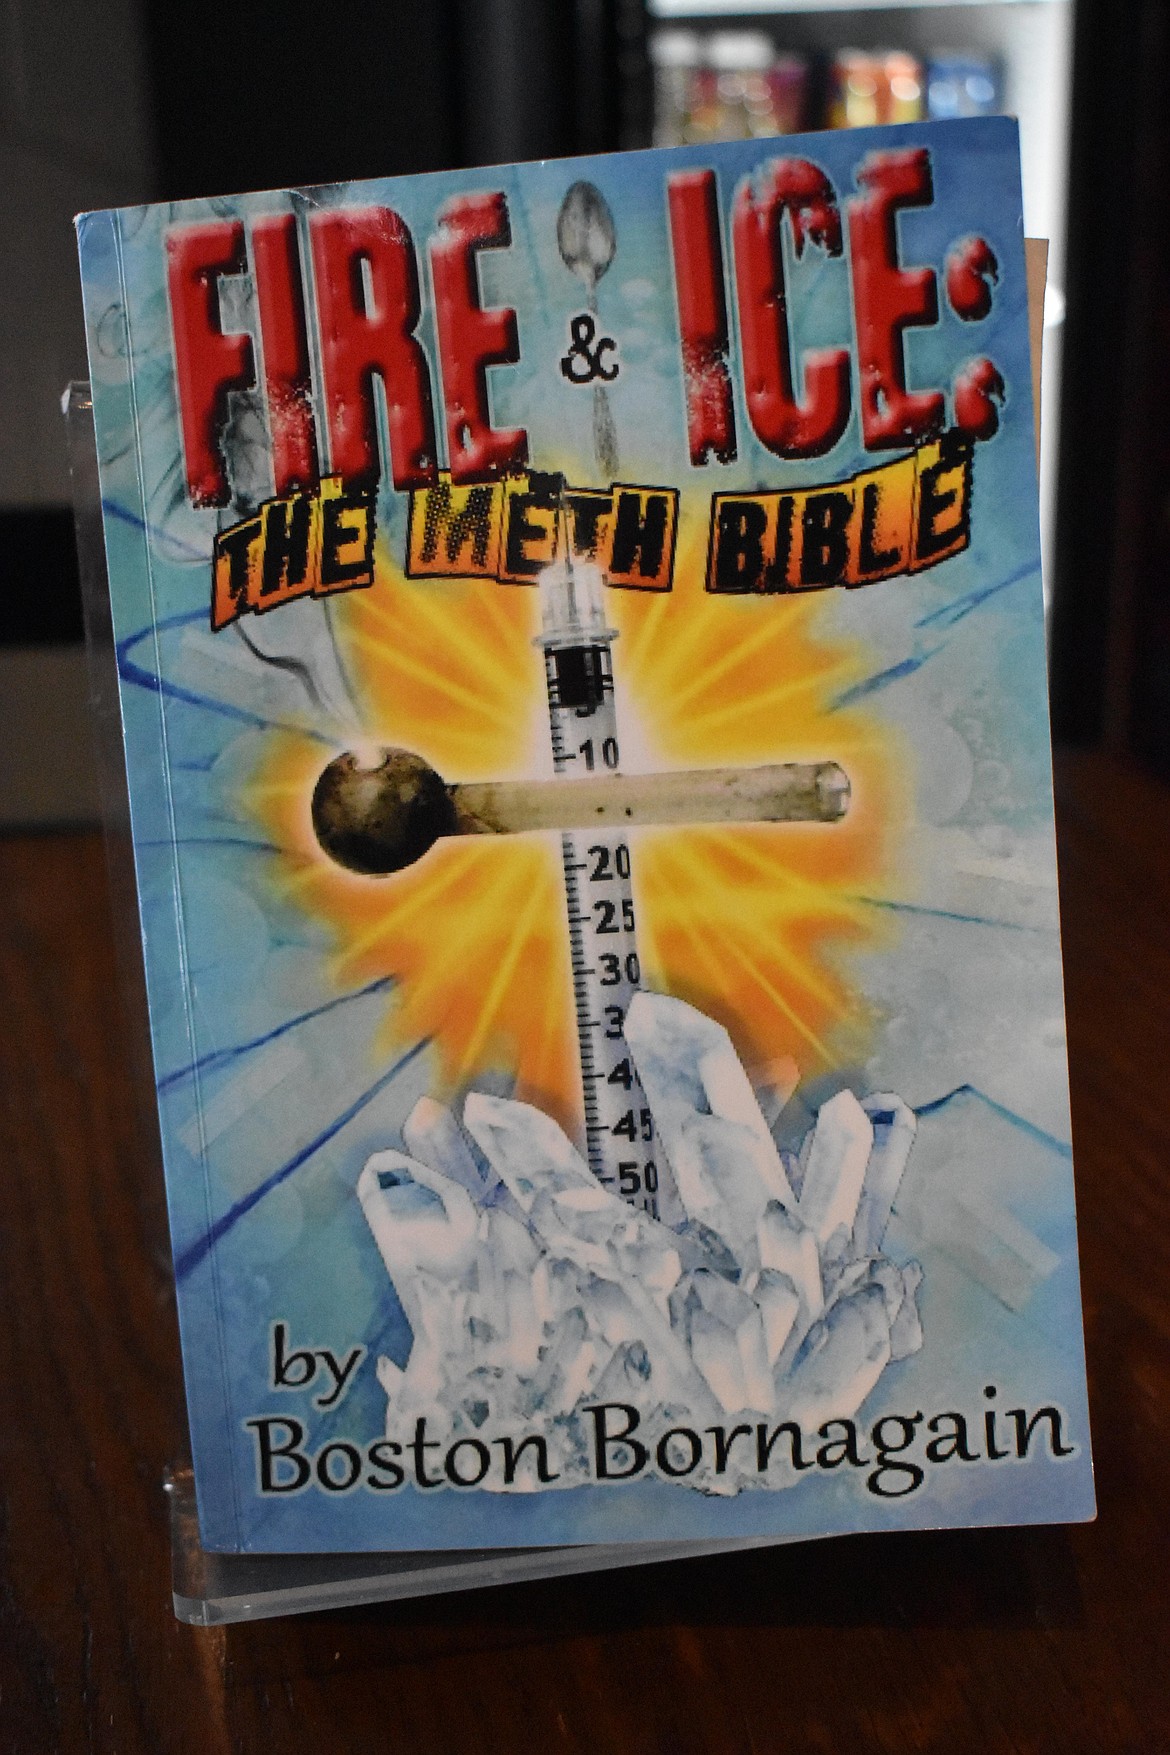 “Fire & Ice: The Meth Bible”, written by Boston Bornagain, is available on Amazon and Barnes and Noble.